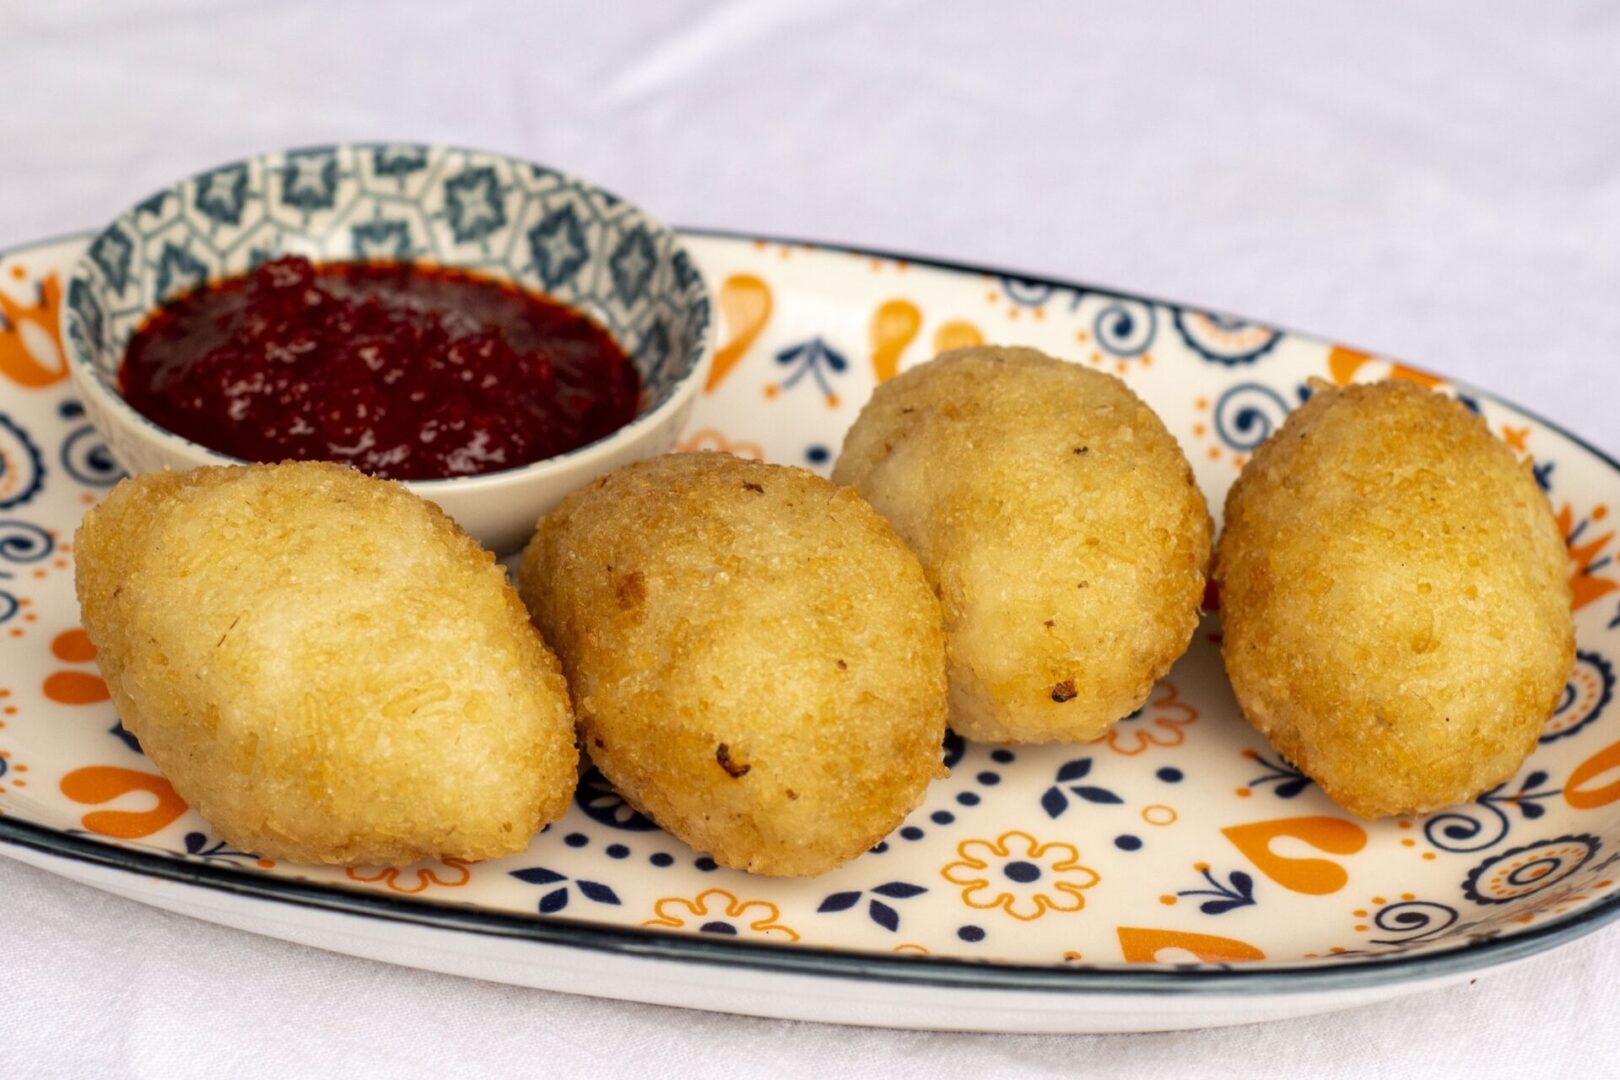 A plate of food with some fried dough balls and sauce.